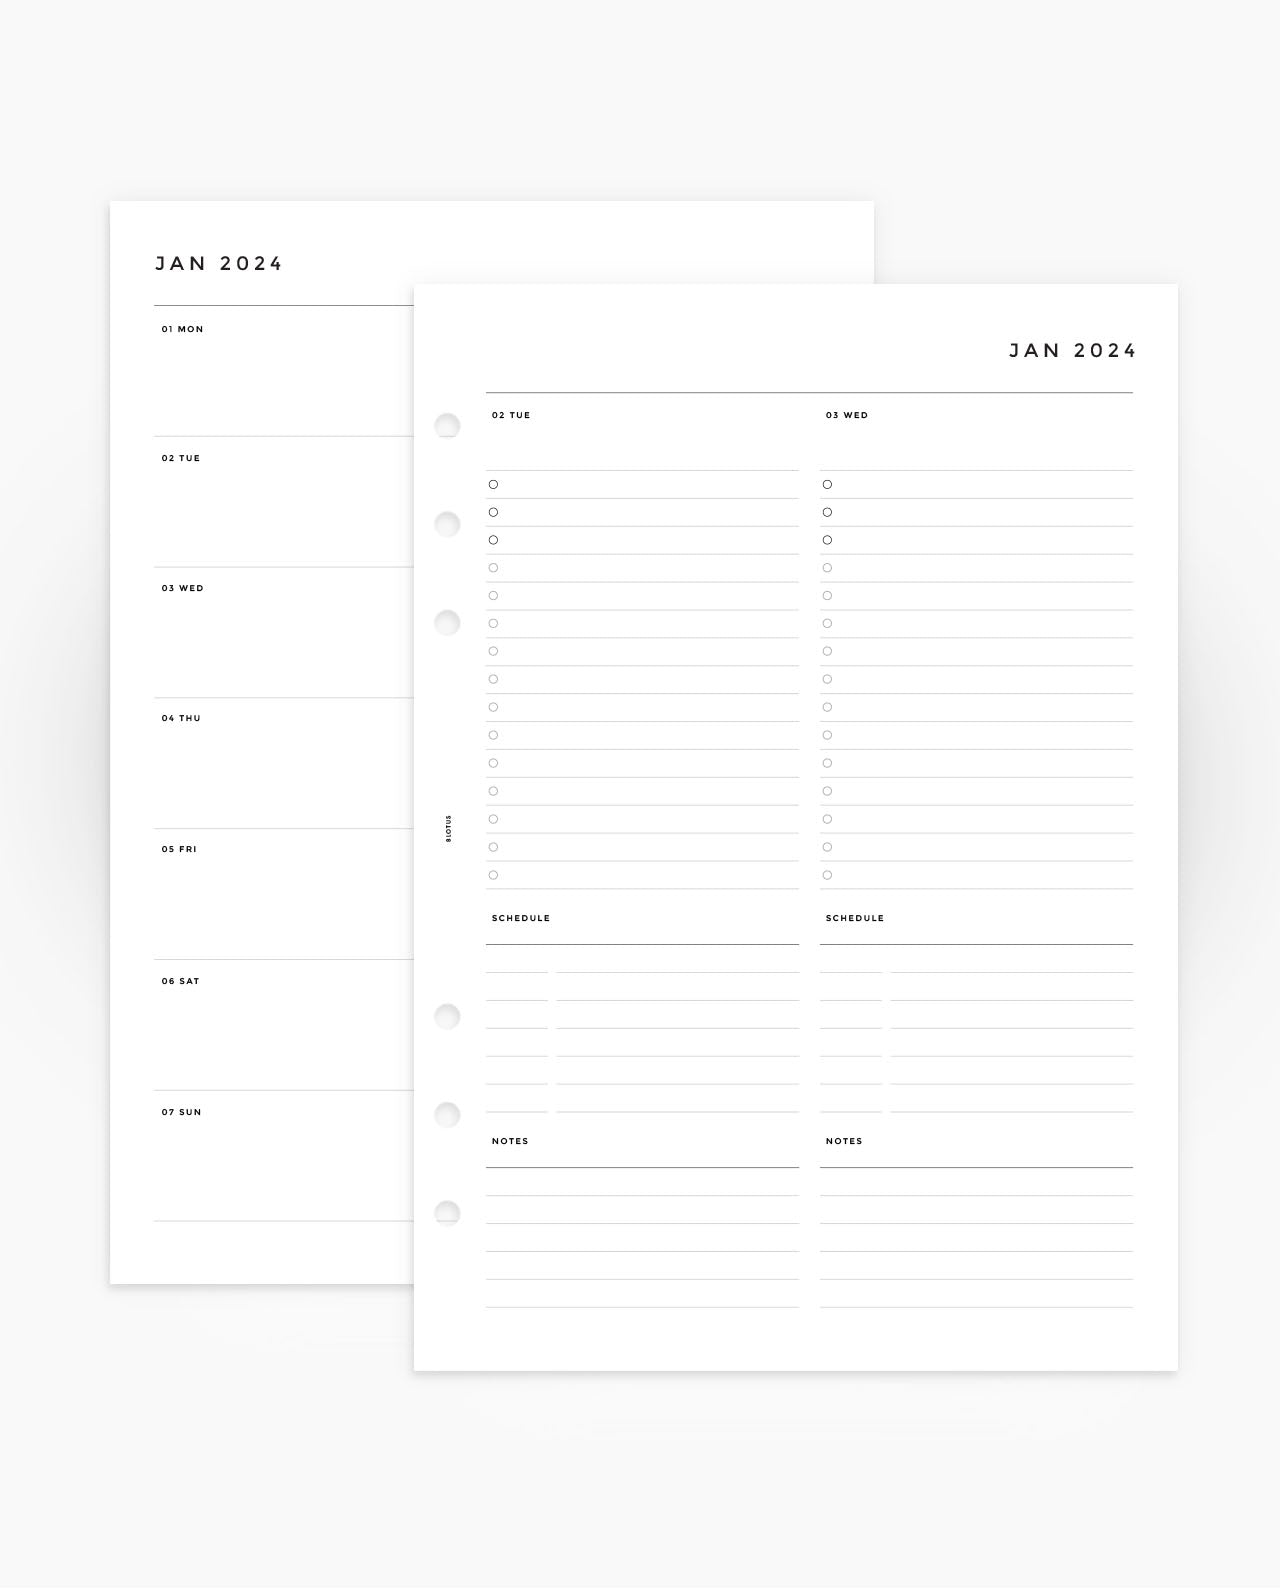 MN080 - 2024 Daily Planner Inserts - 2DO1P